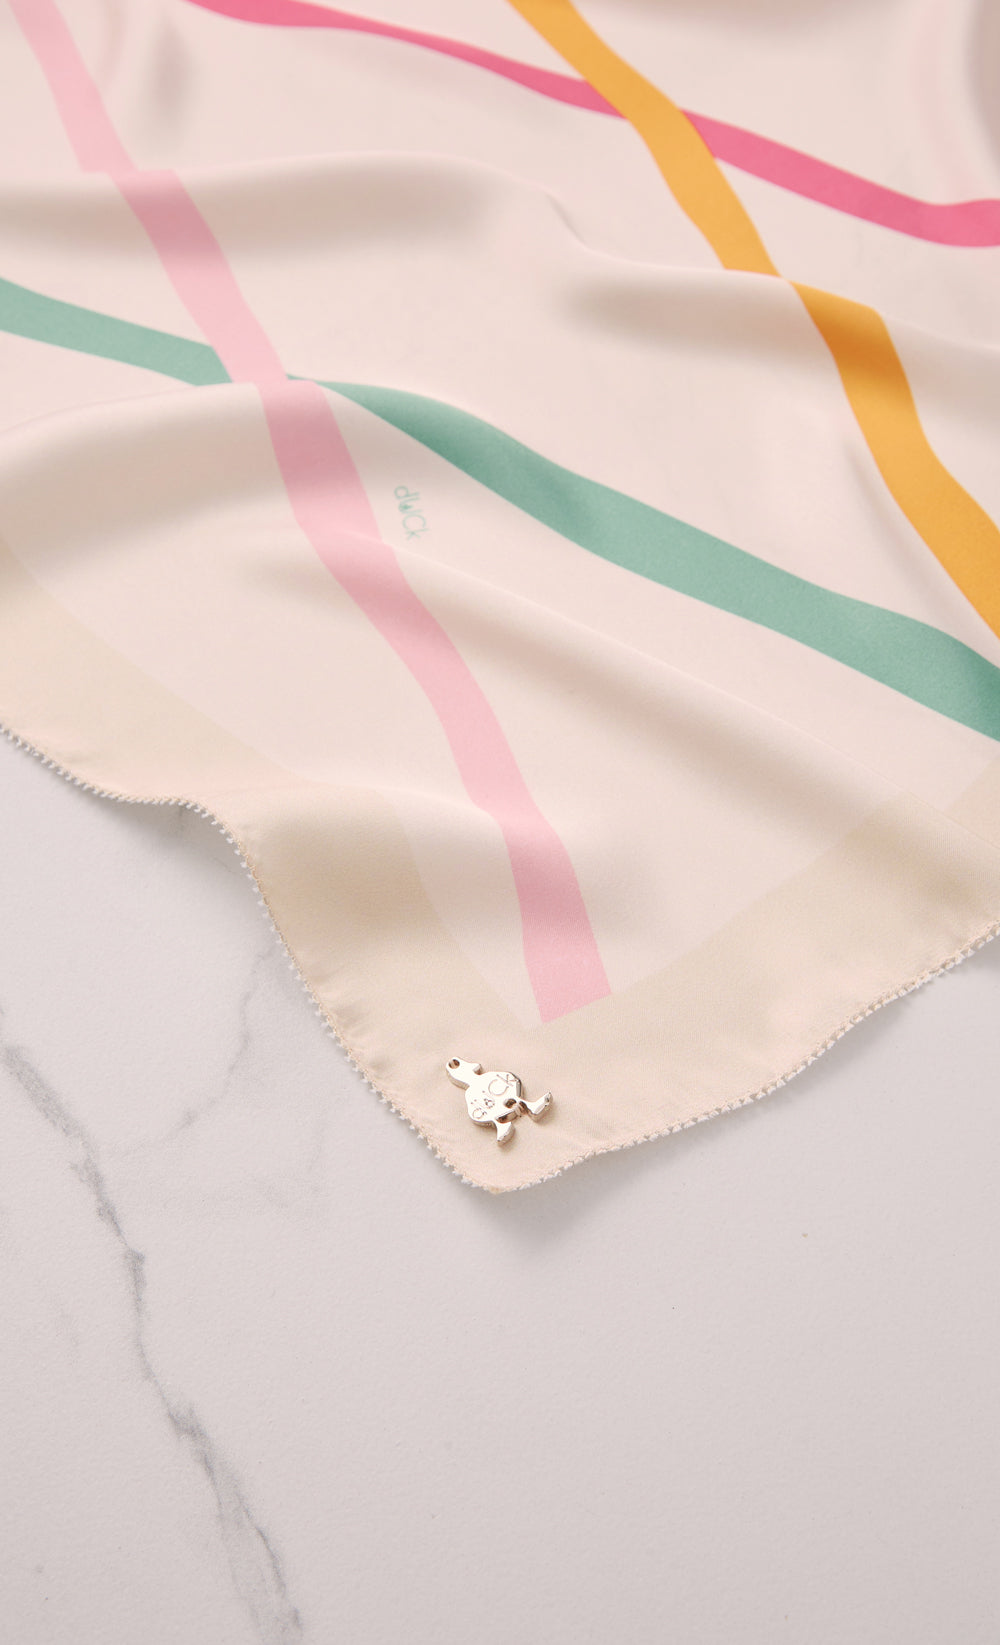 The Blurred Lines dUCk Square Scarf in Macaron